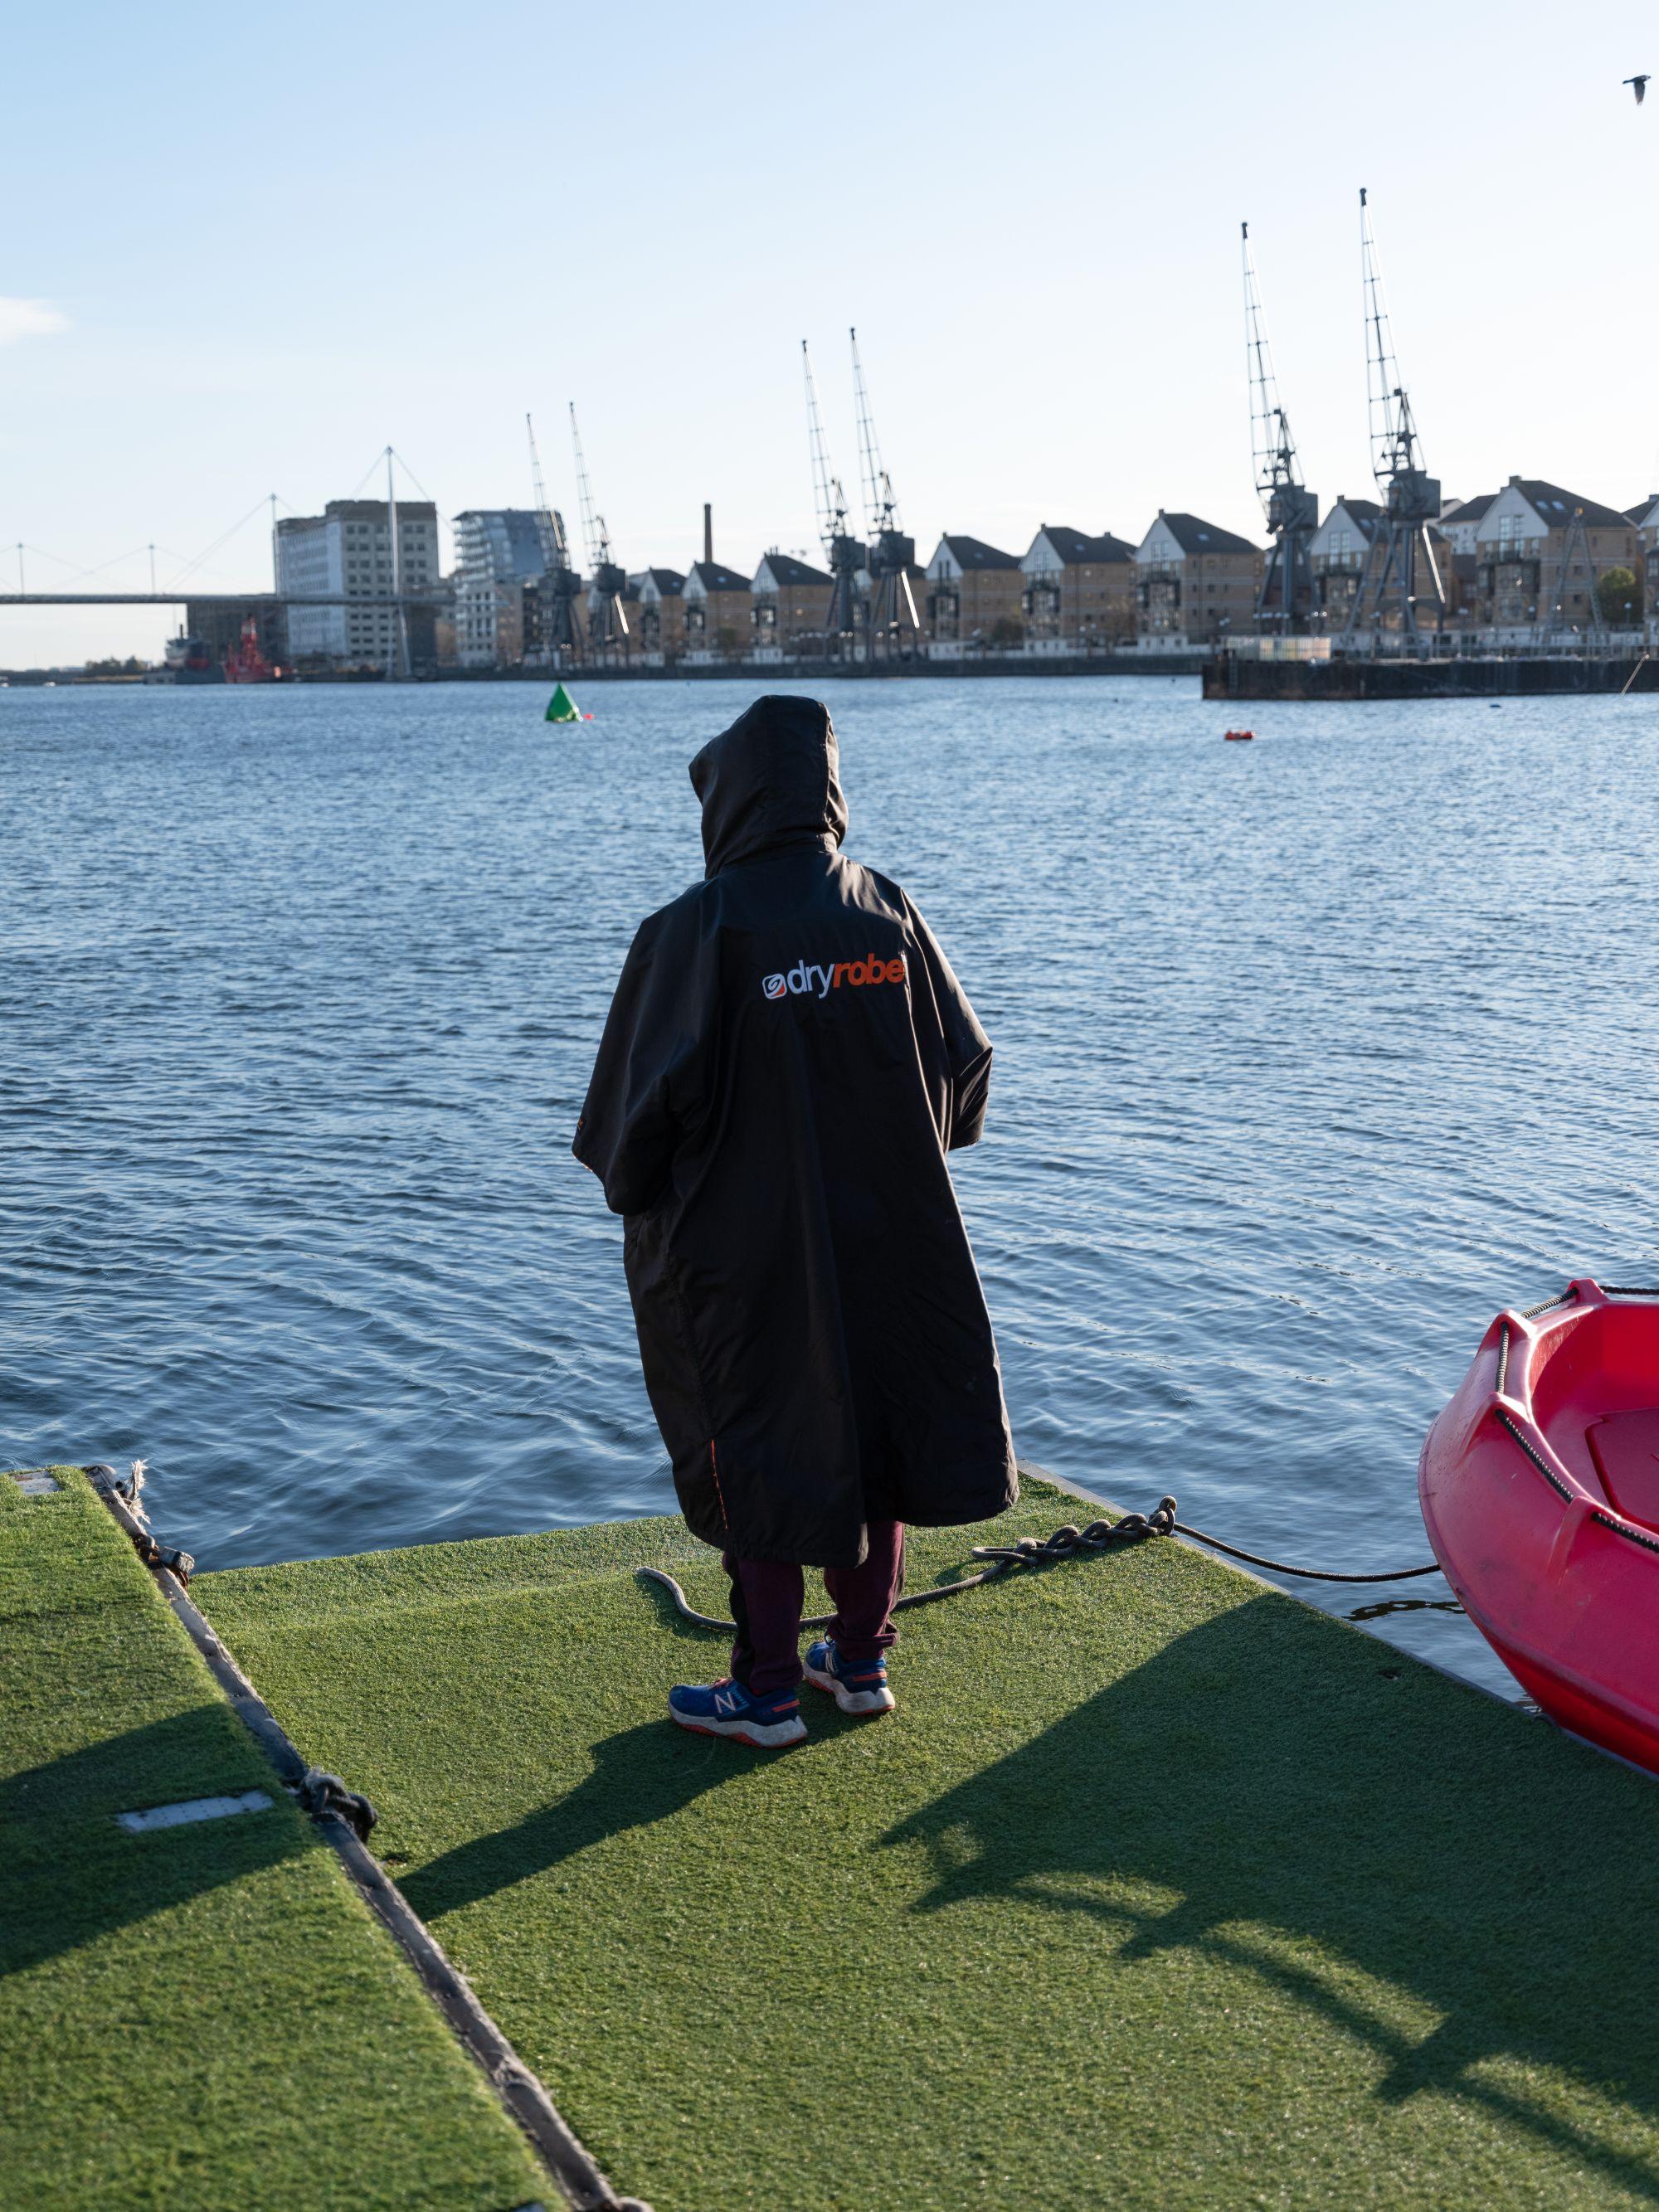 A person in a dryrobe surveys the water